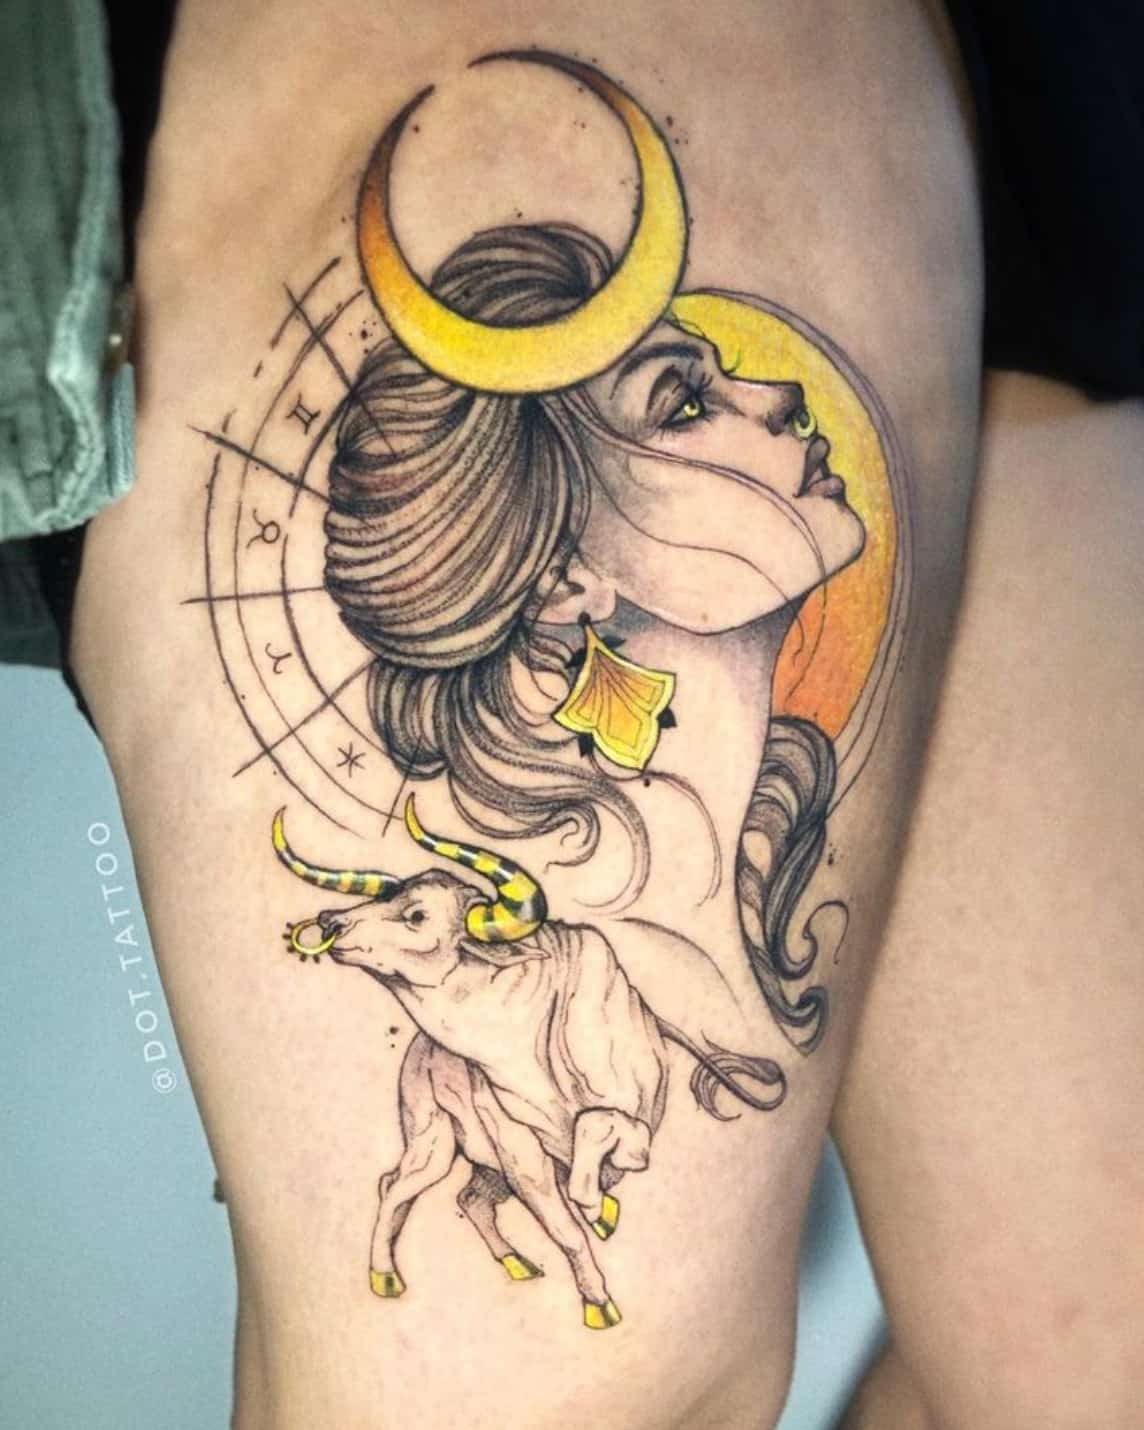 15 Taurus Tattoo Ideas To Get Bull Inked On Your Body